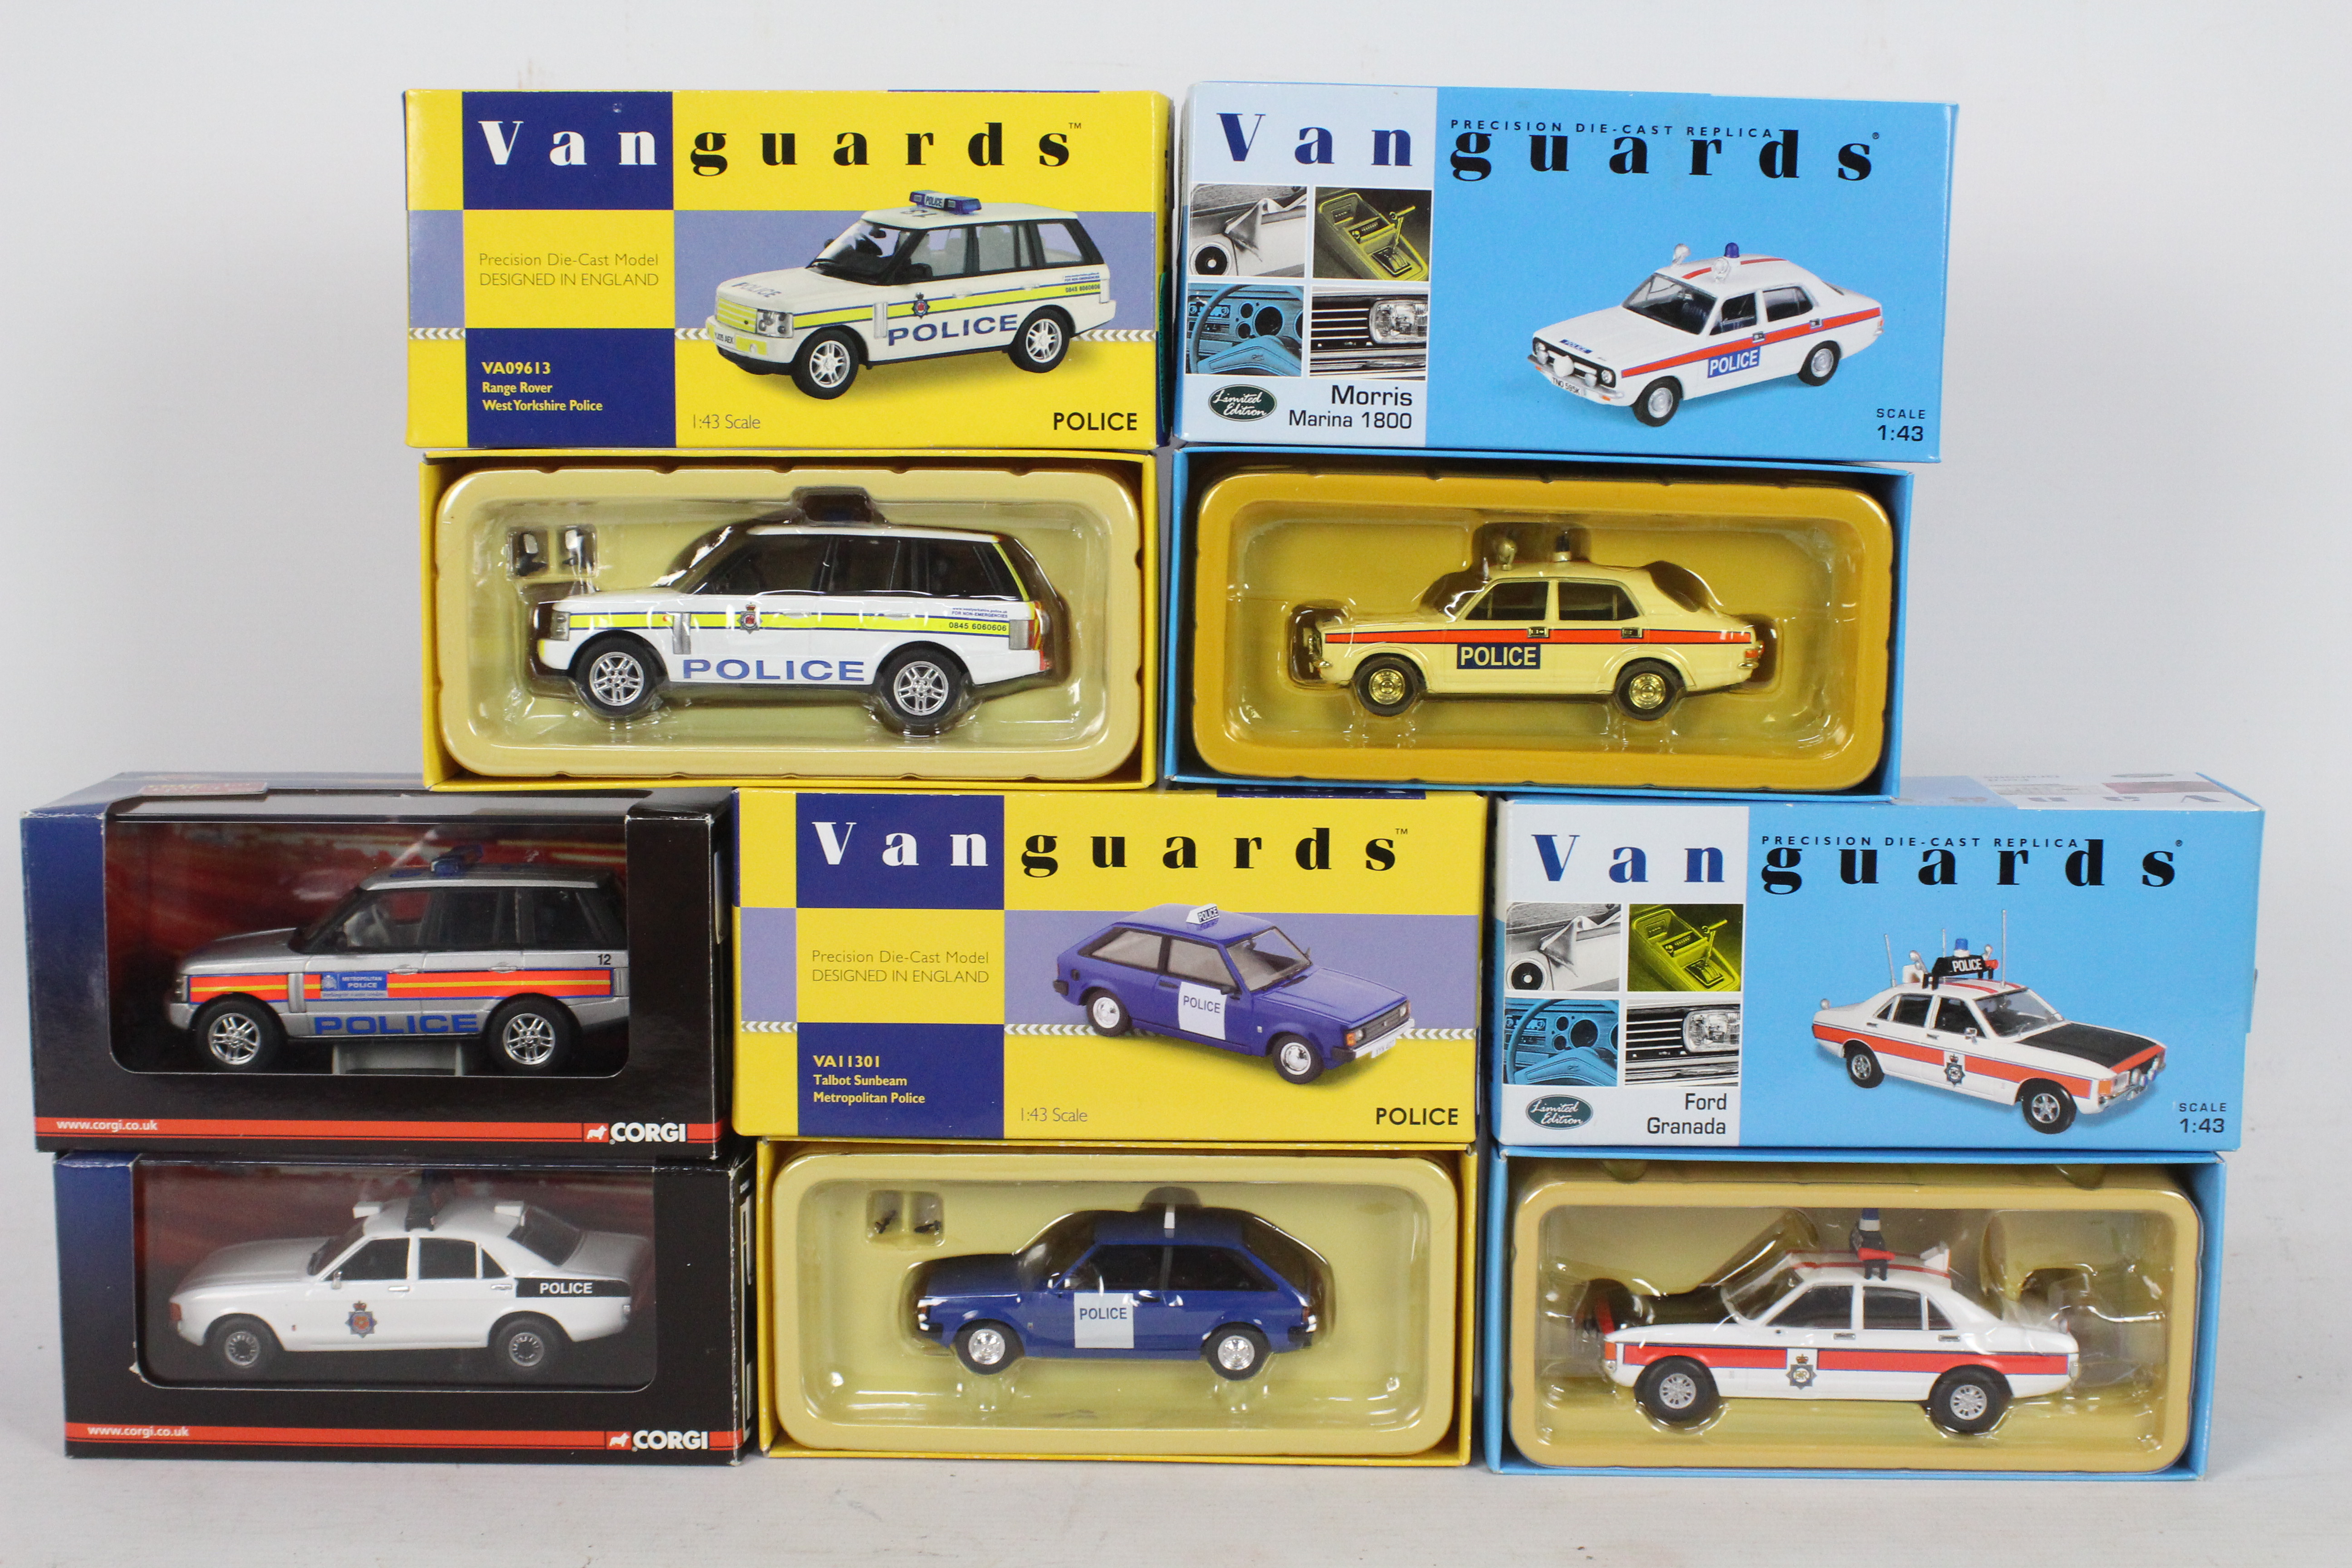 Vanguards - A squad of six Limited Edition diecast 1:43 scale 'Police' vehicles from Vanguards.